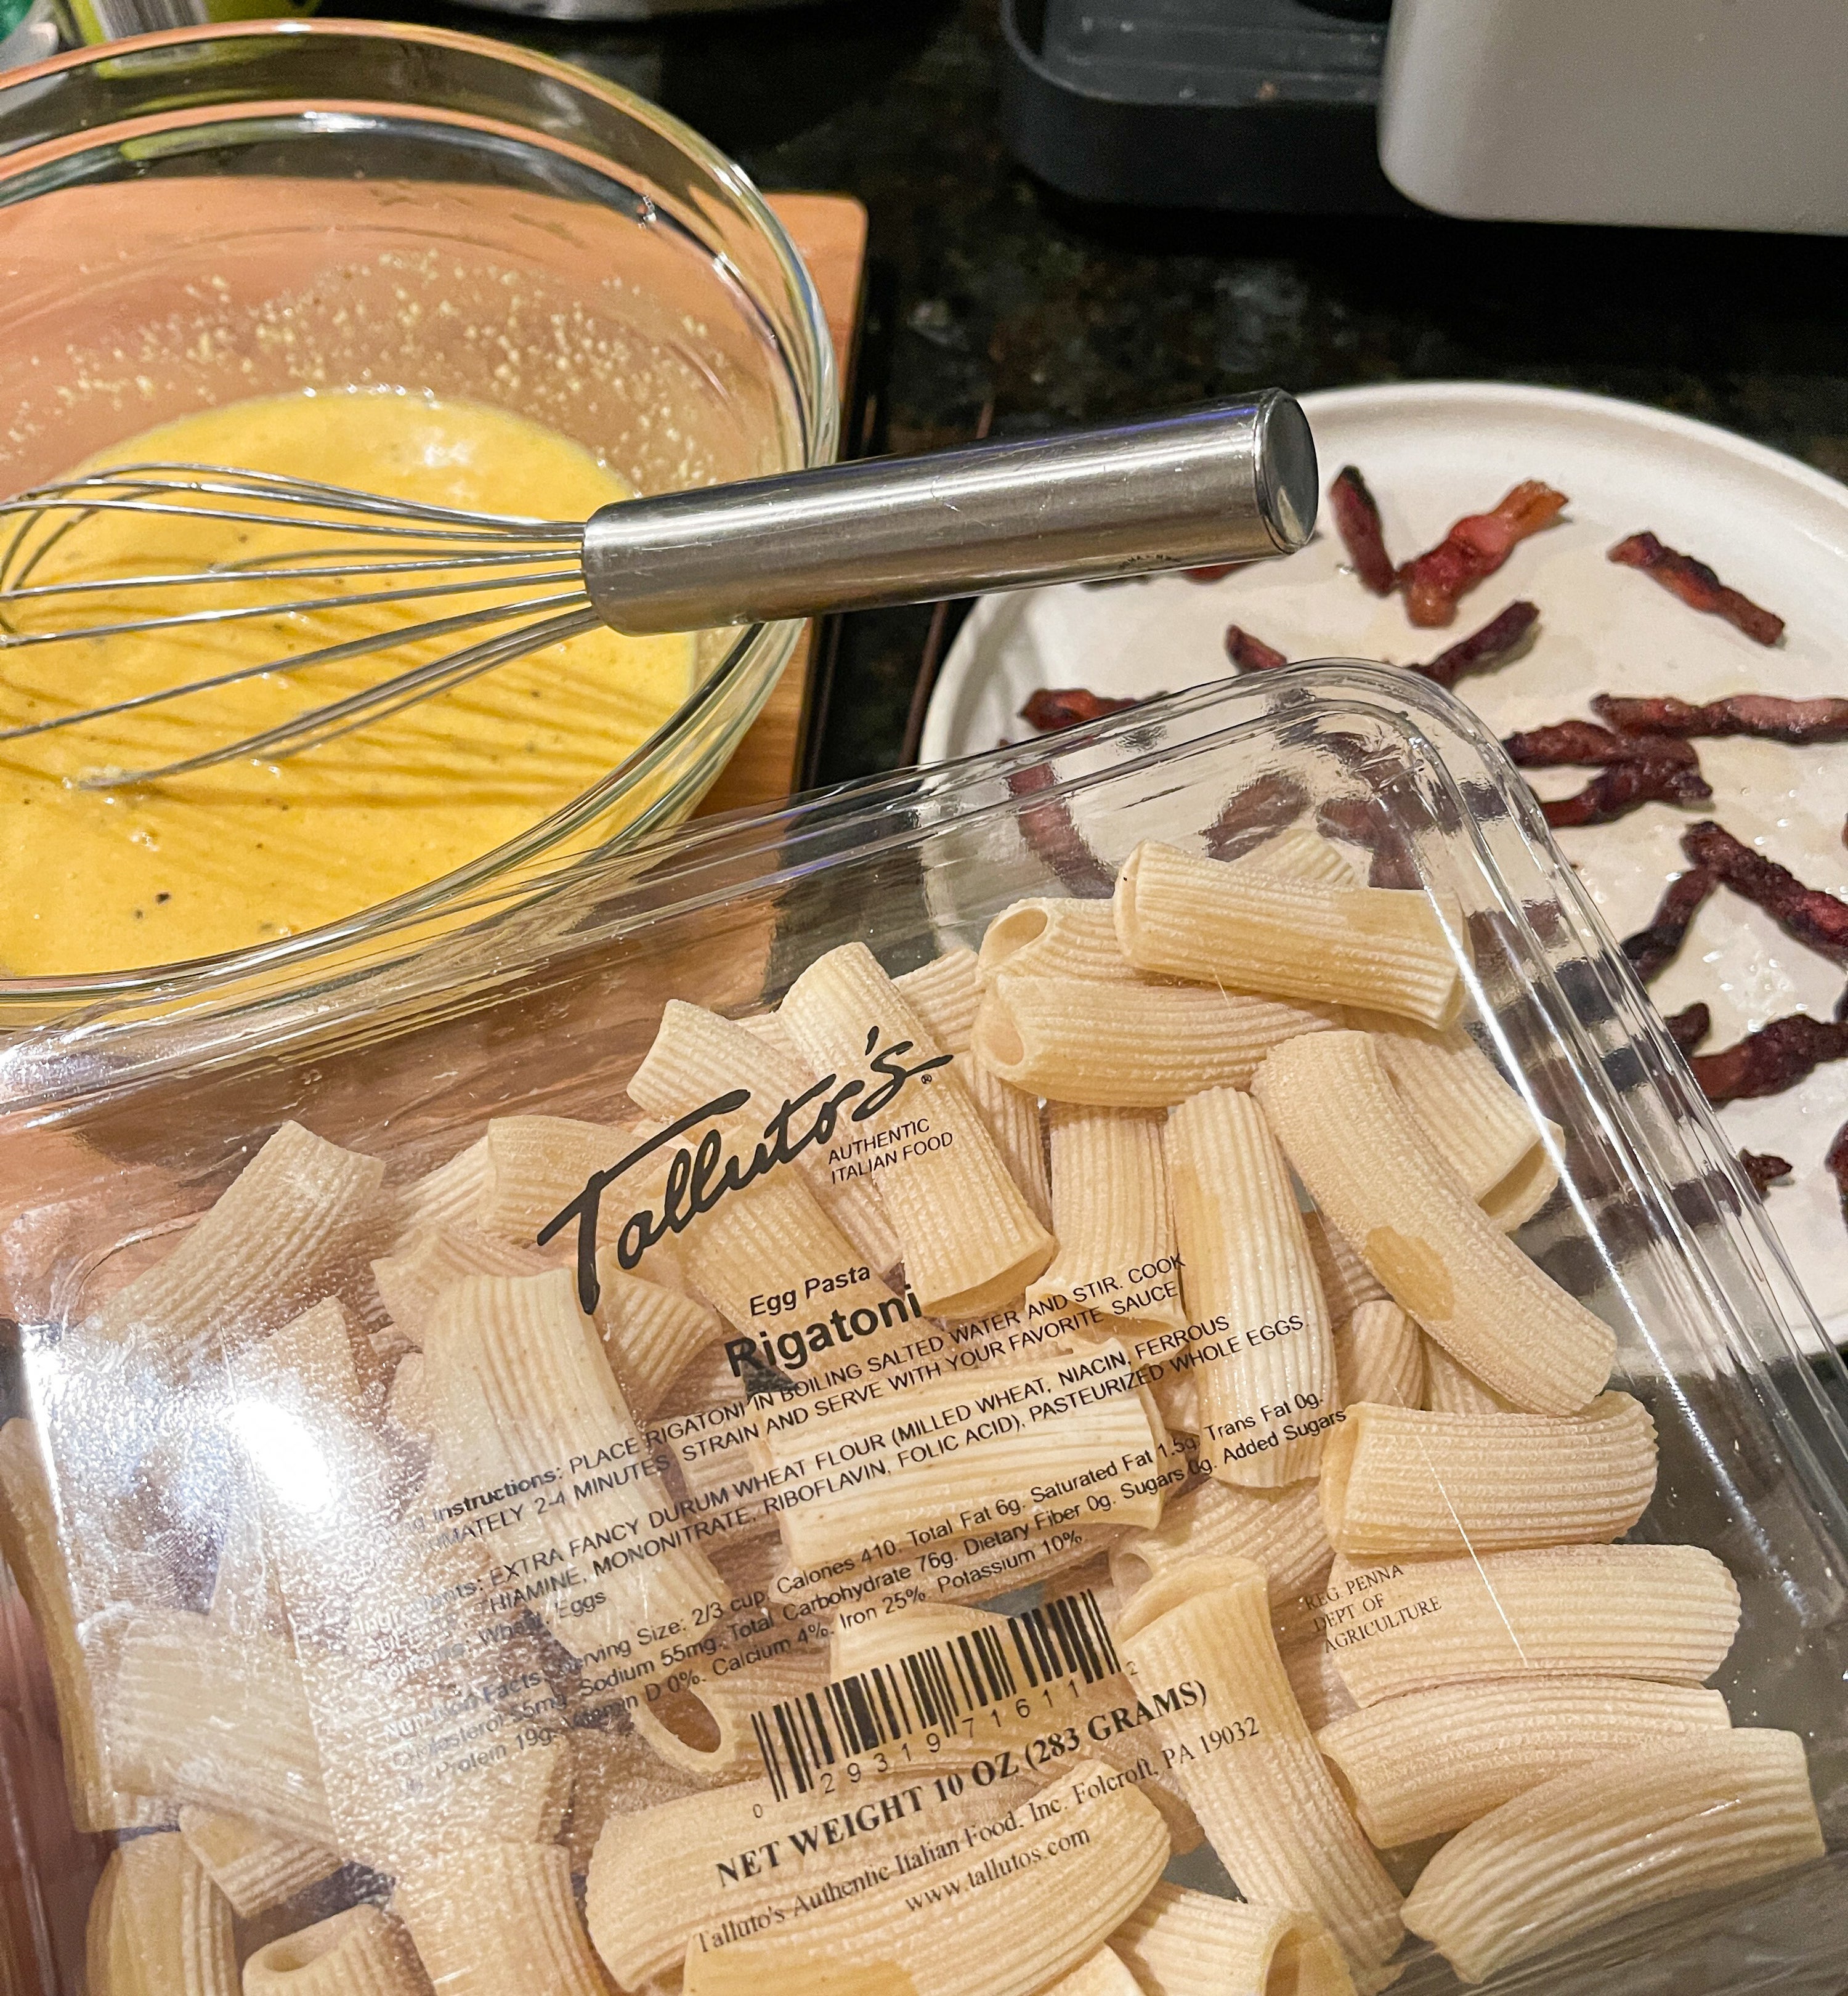 plastic container of store-bought uncooked rigatoni